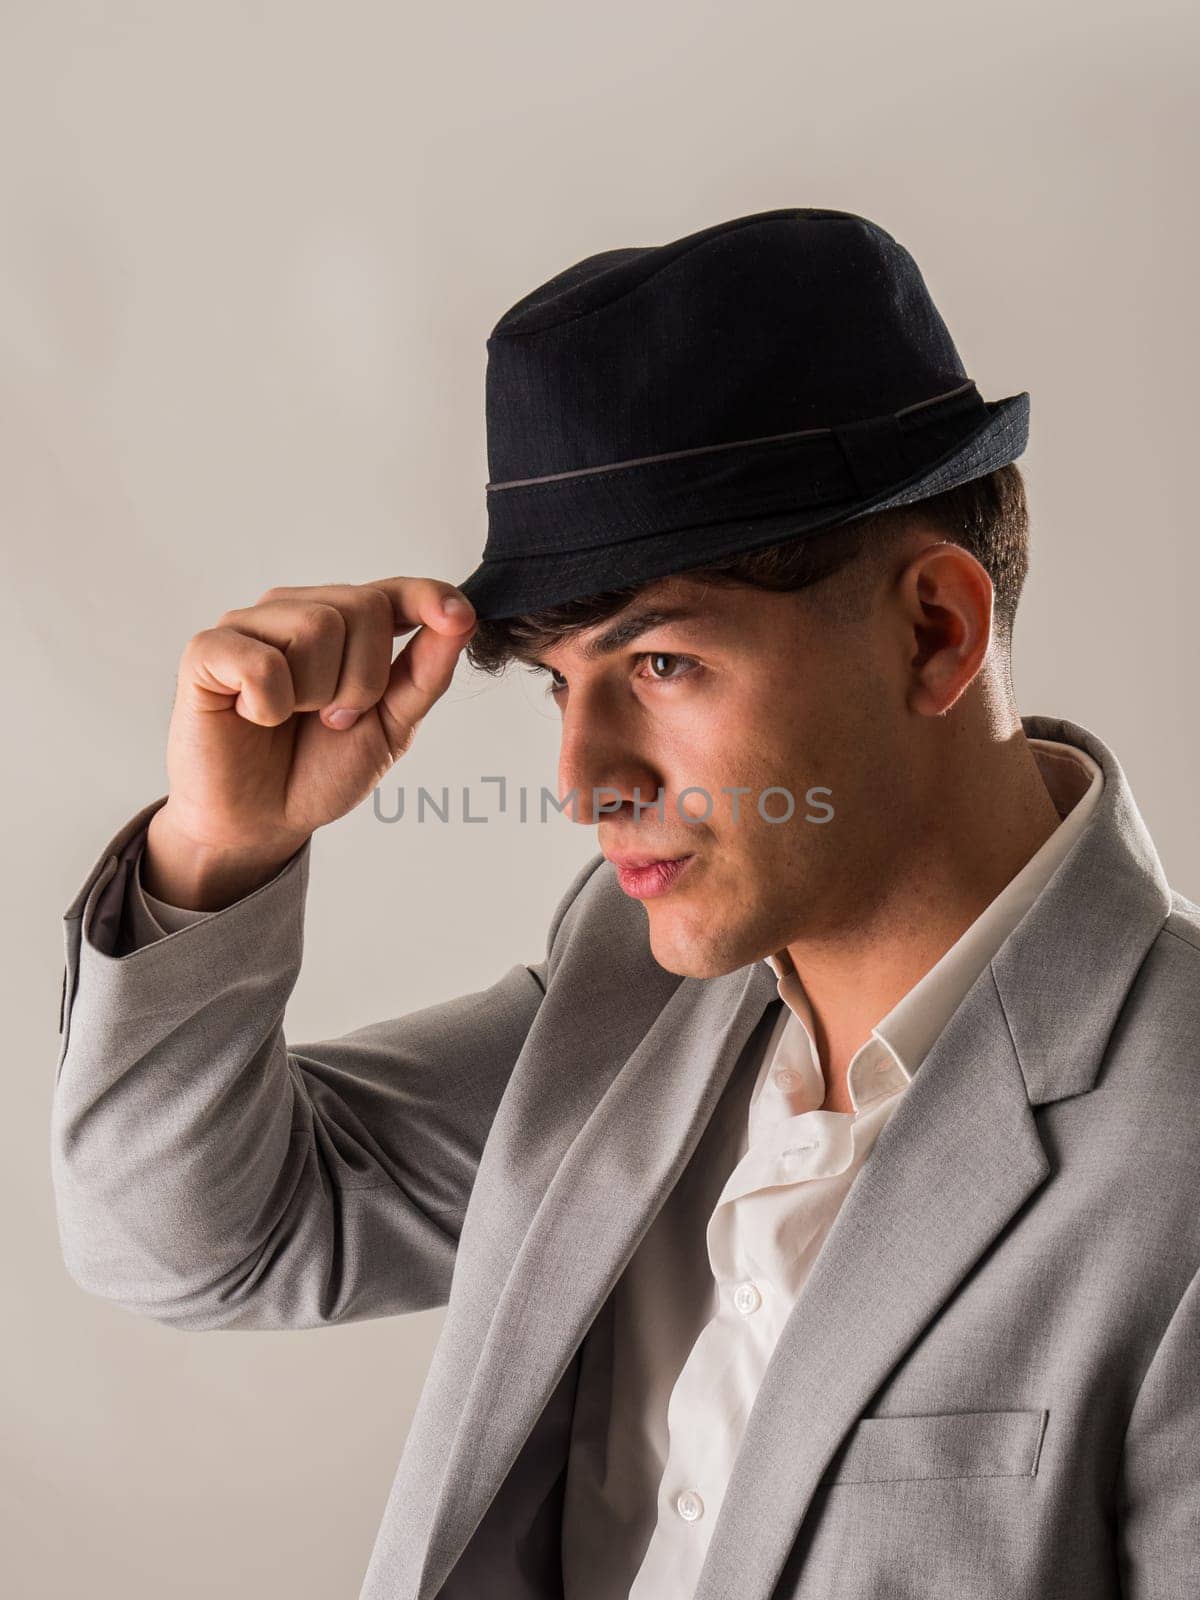 Attractive elegant young man with business suit and fedora hat, on white, looking away, seen sideways